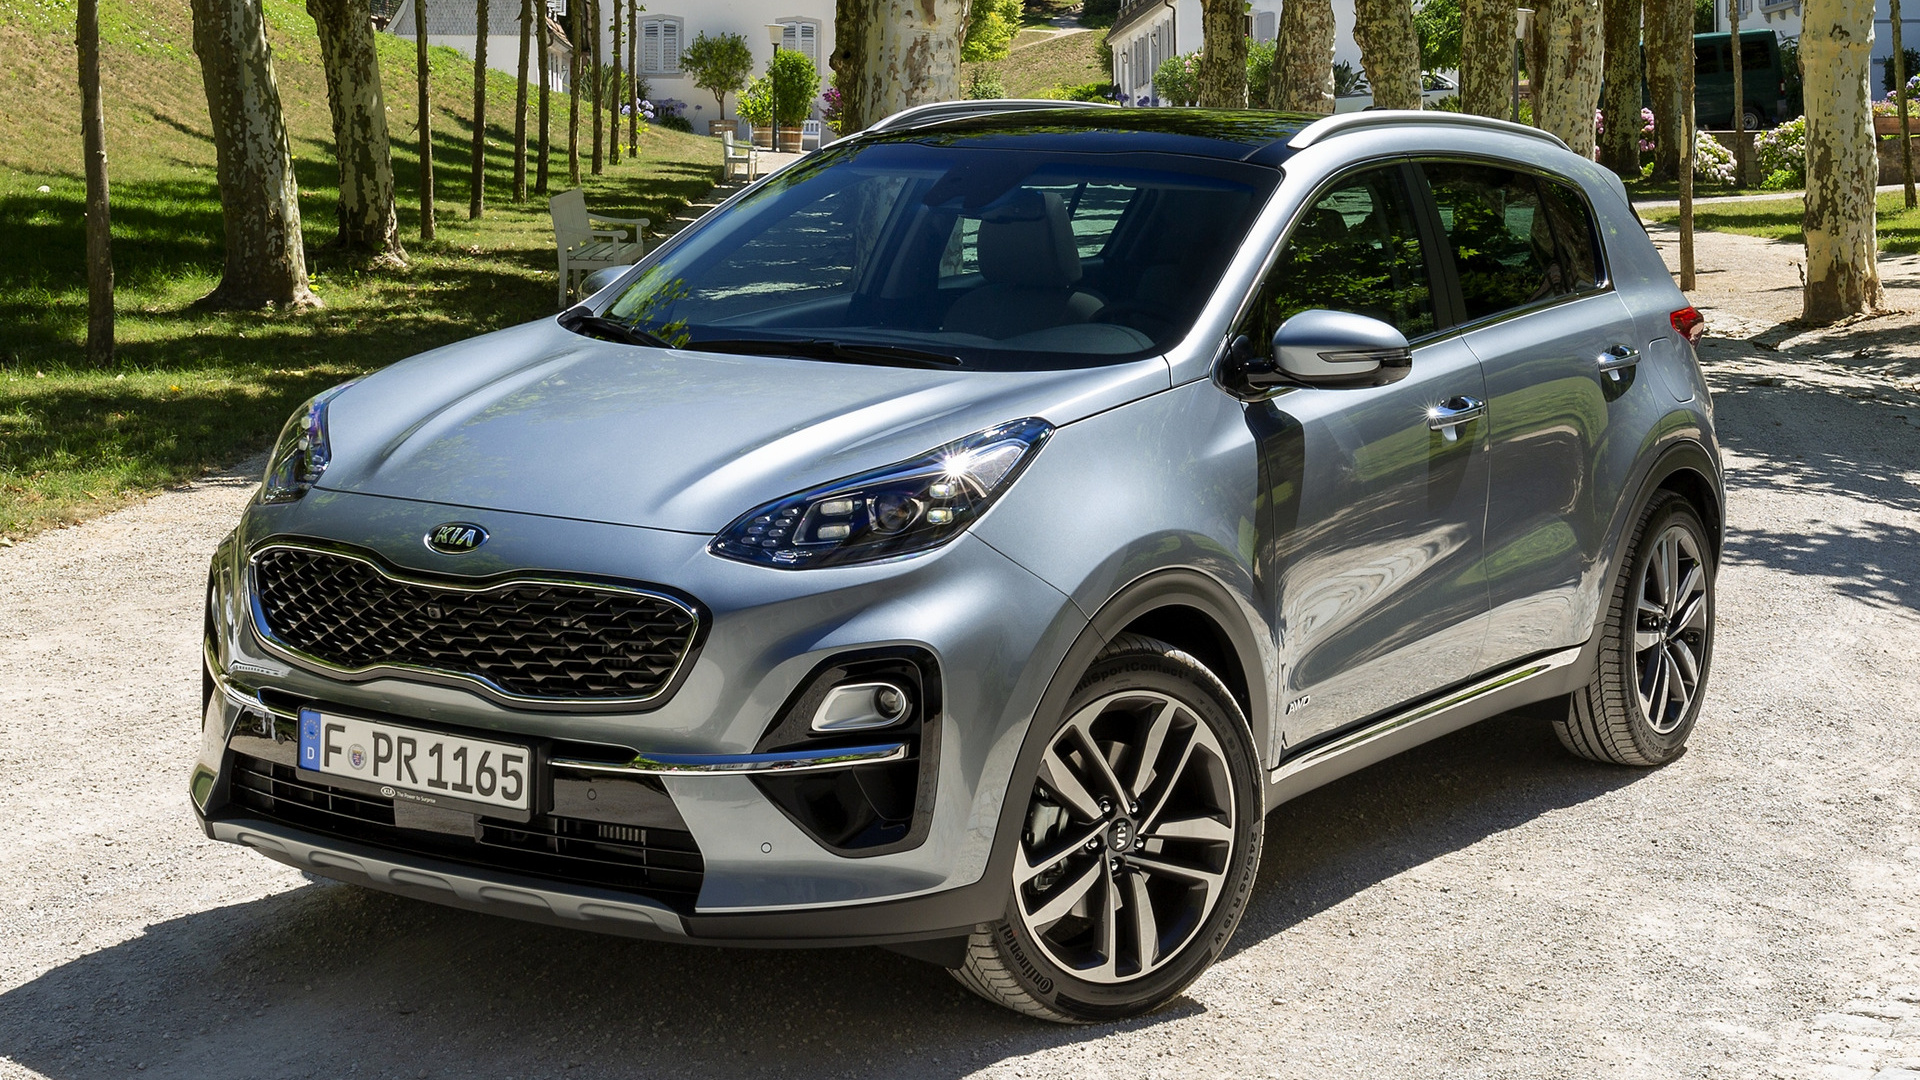 Kia Sportage HD Wallpapers and Backgrounds. 